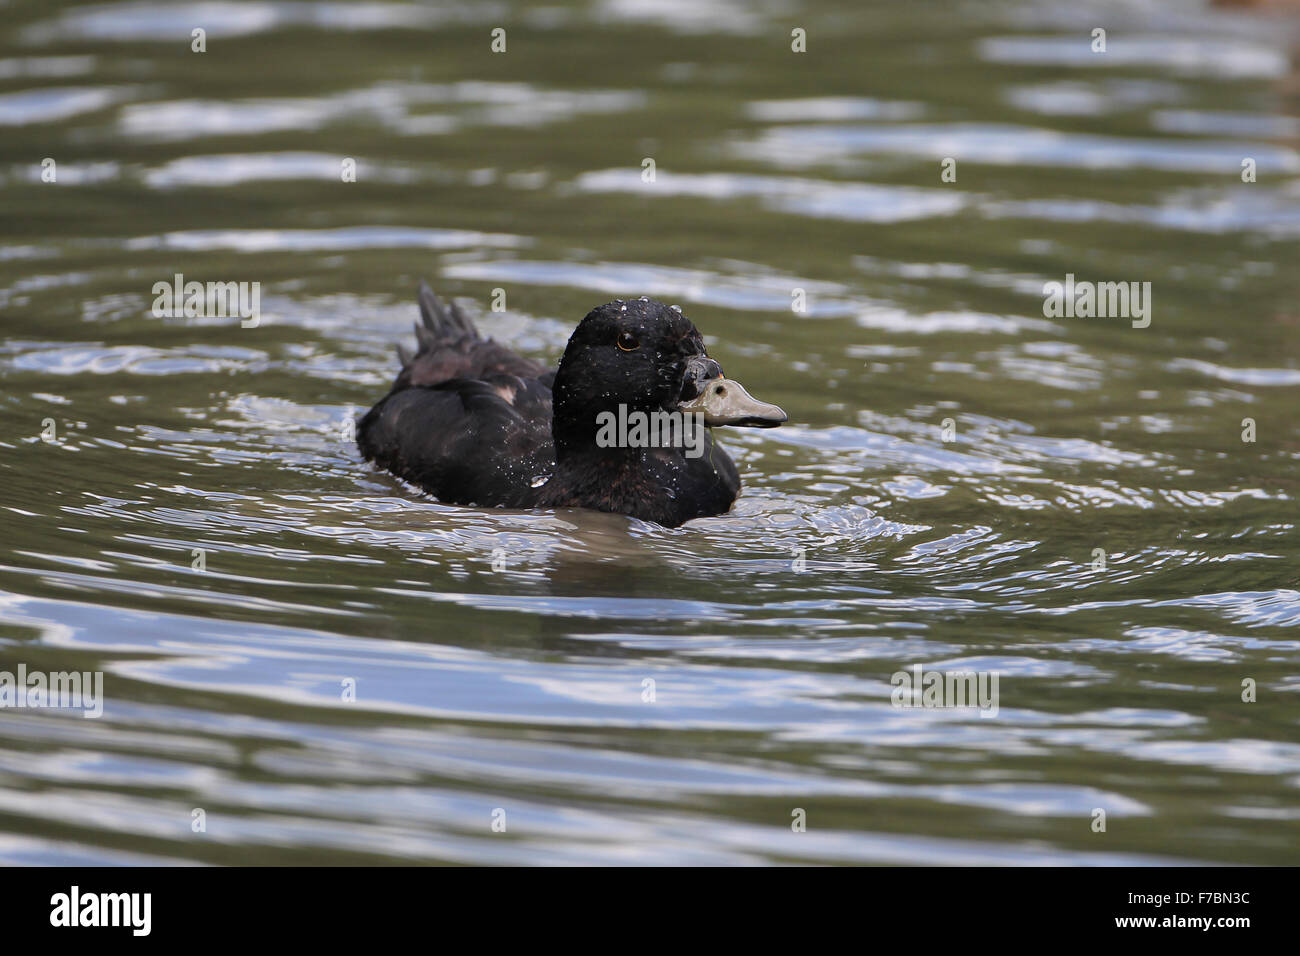 Drake Common Scoter at Arundel Wildfowl & Wetlands Trust, West Sussex, United Kingdom Stock Photo